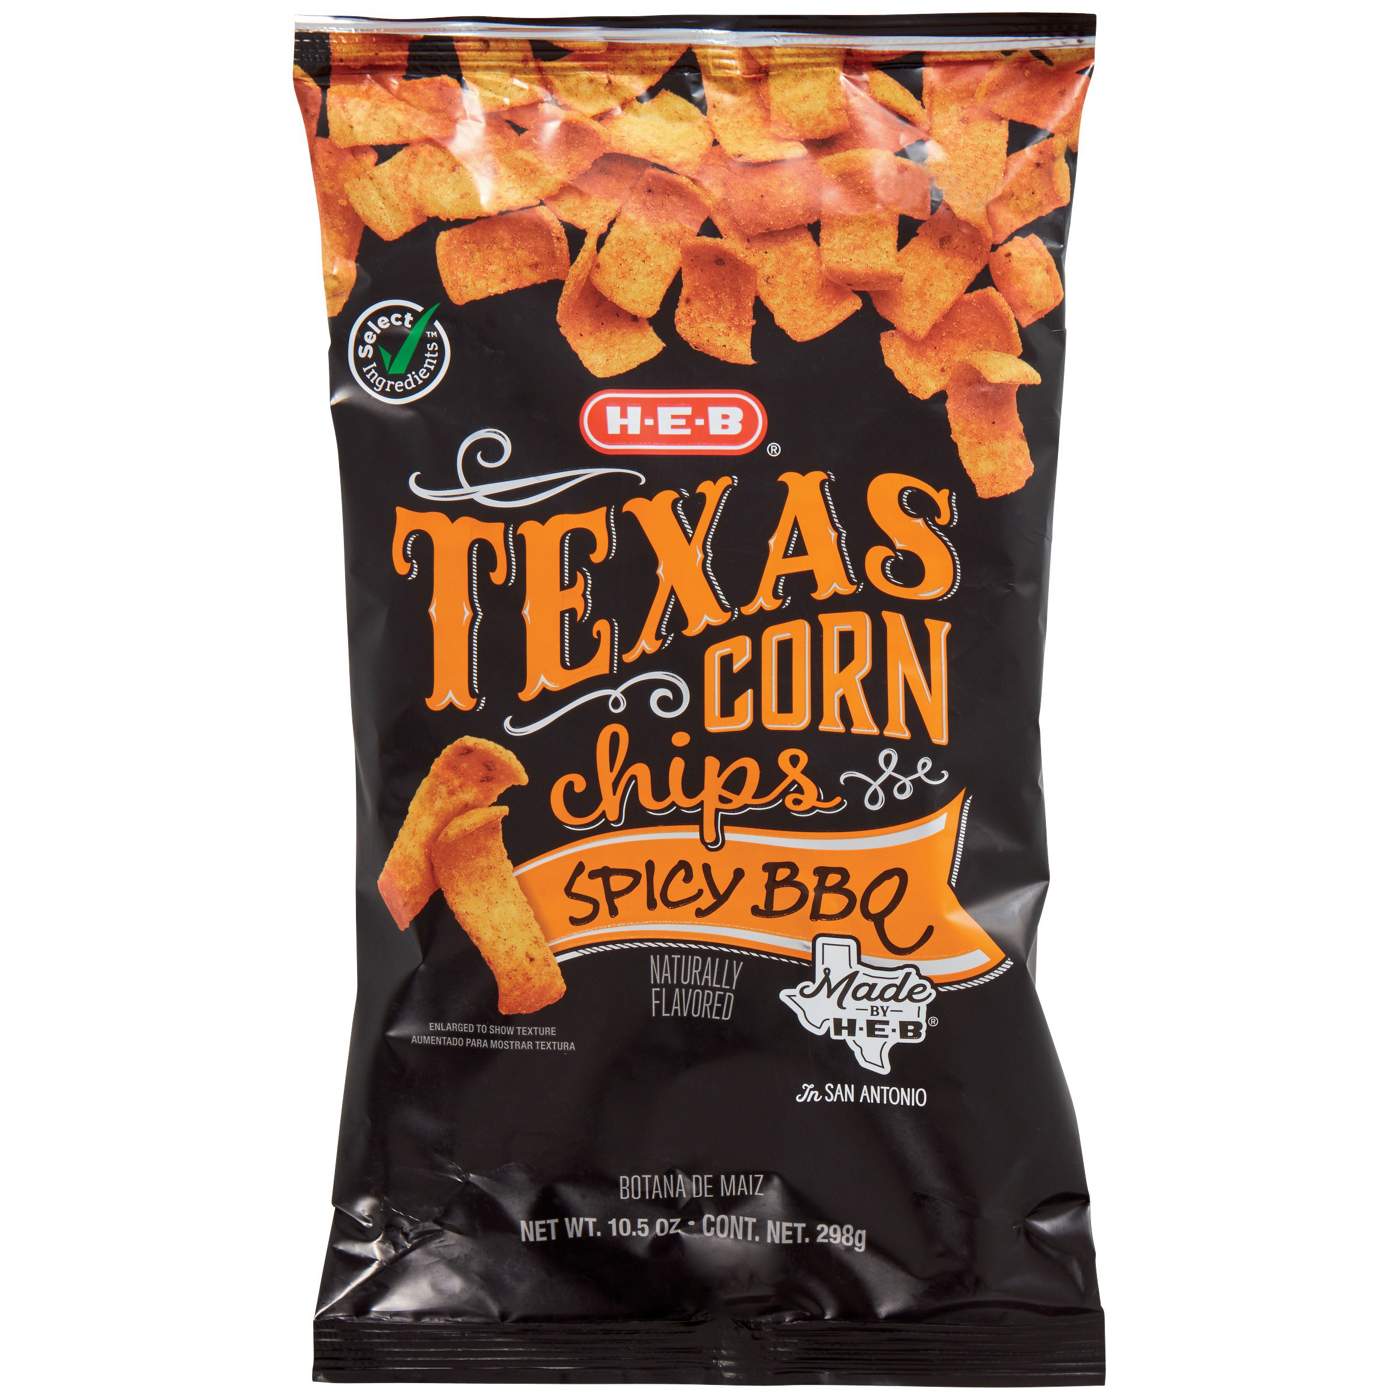 H-E-B Texas Corn Chips - Spicy BBQ; image 1 of 2